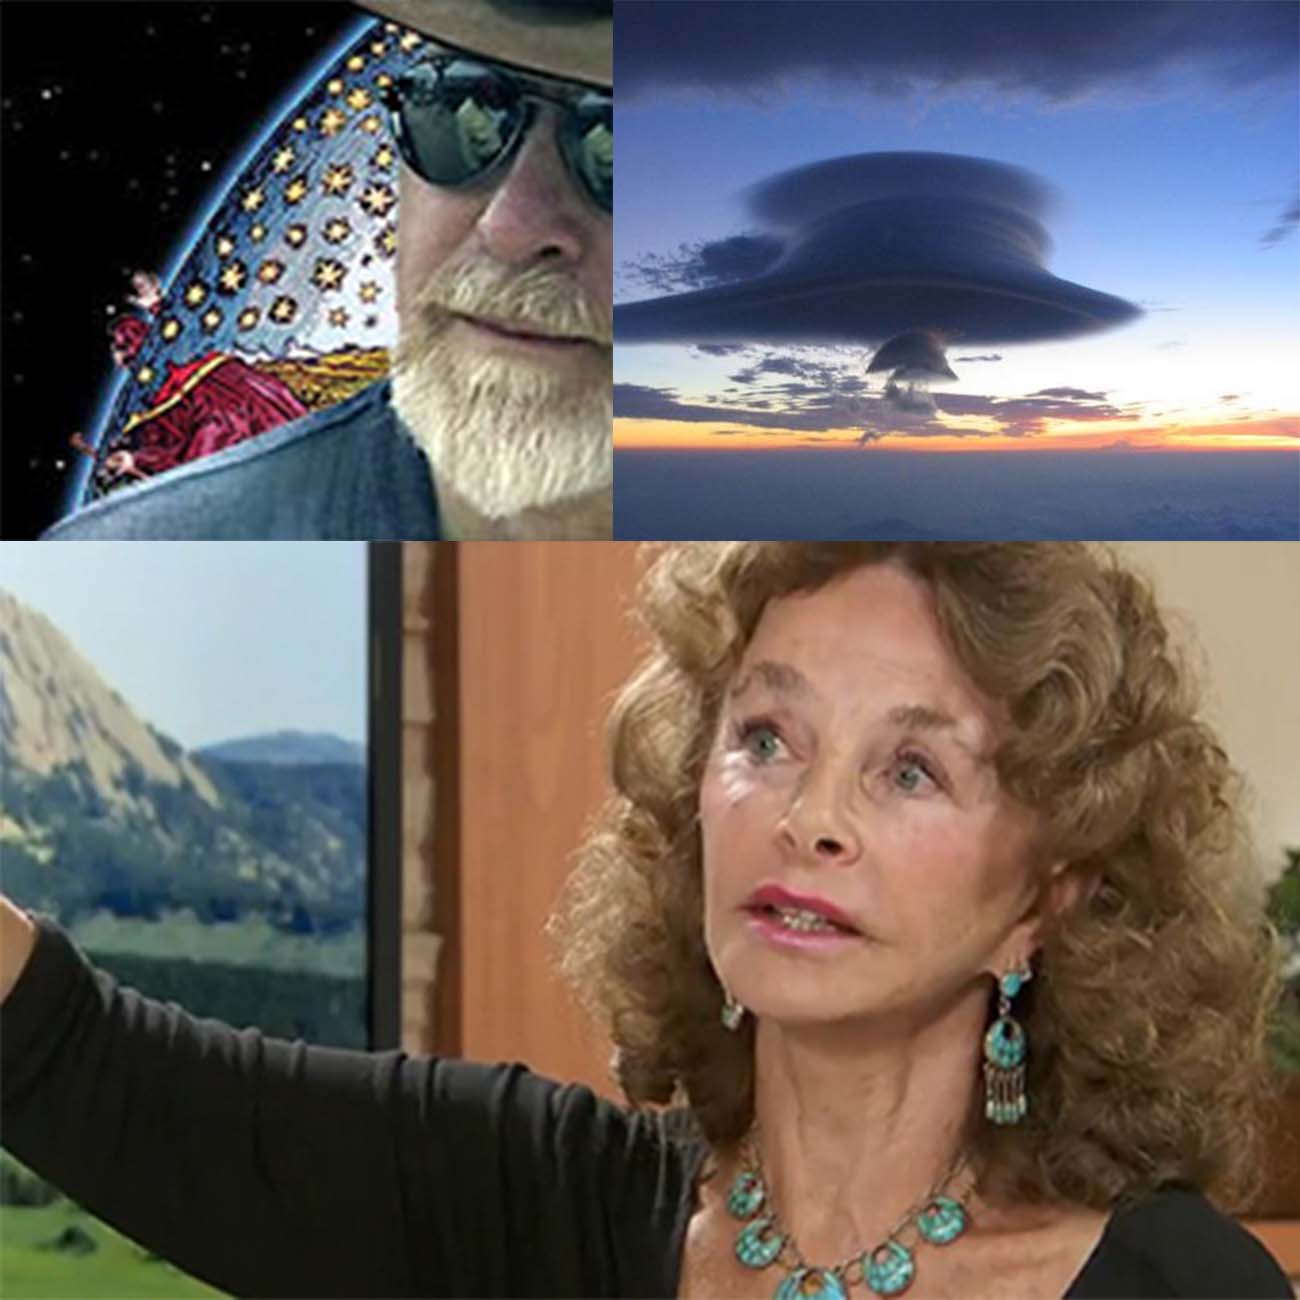 Show #320: February 19, 2012 - 'Gabriel's Trumpet' with Linda Moulton Howe and Larry Lowe (CBS Radio)